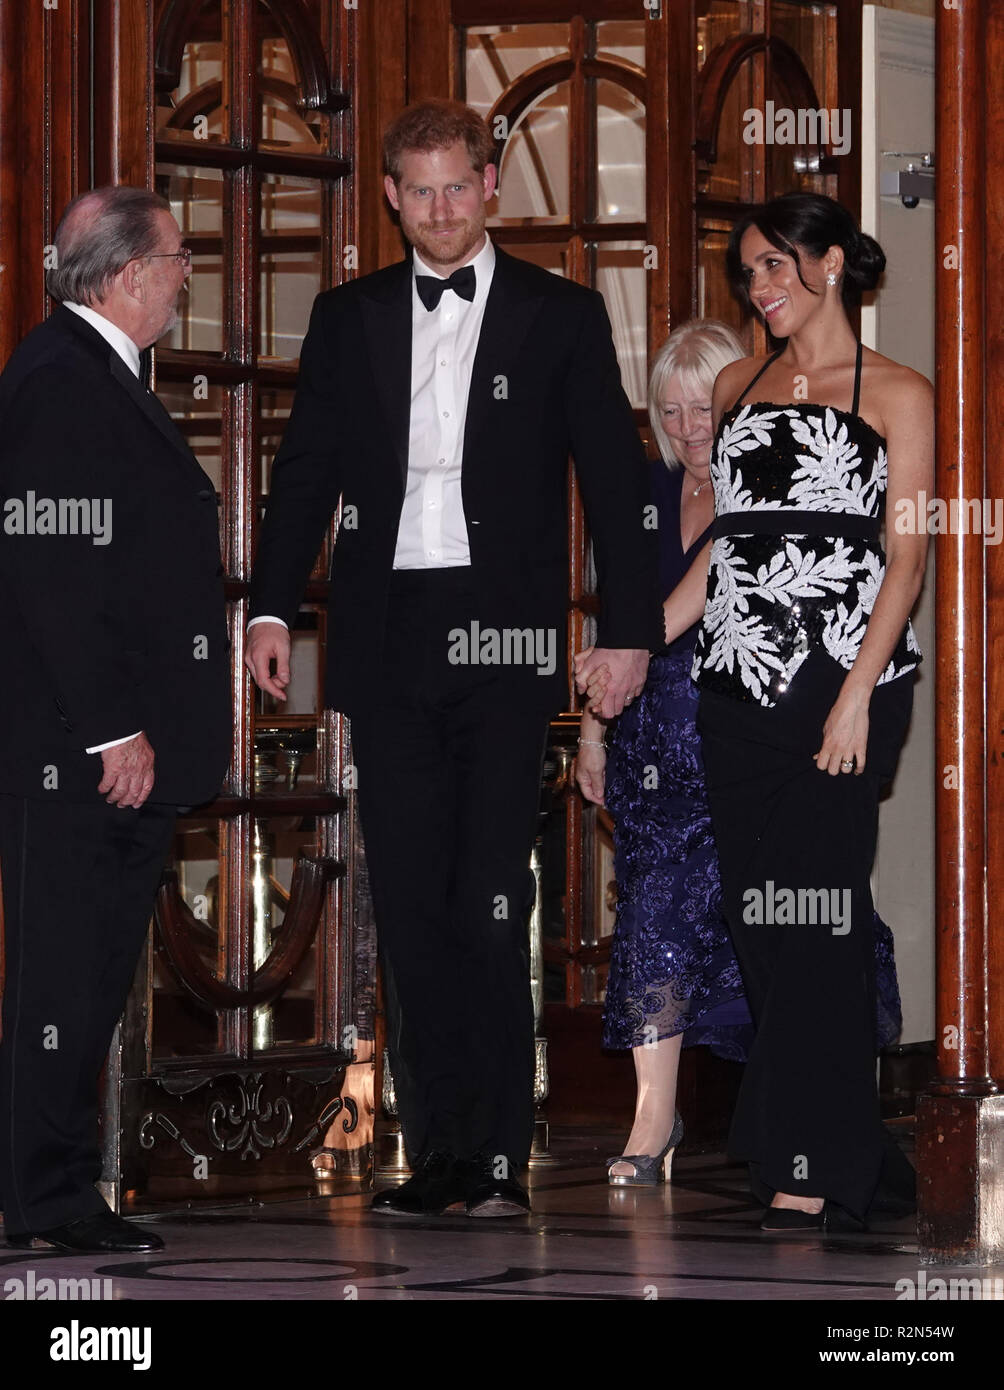 London, UK. 19th Nov, 2018. Prince Harry and Meghan Duchess of Sussex attend 106th Royal Variety Performance charity show at London Palladium Theatre Credit: Andy Stehrenberger/Alamy Live News Stock Photo